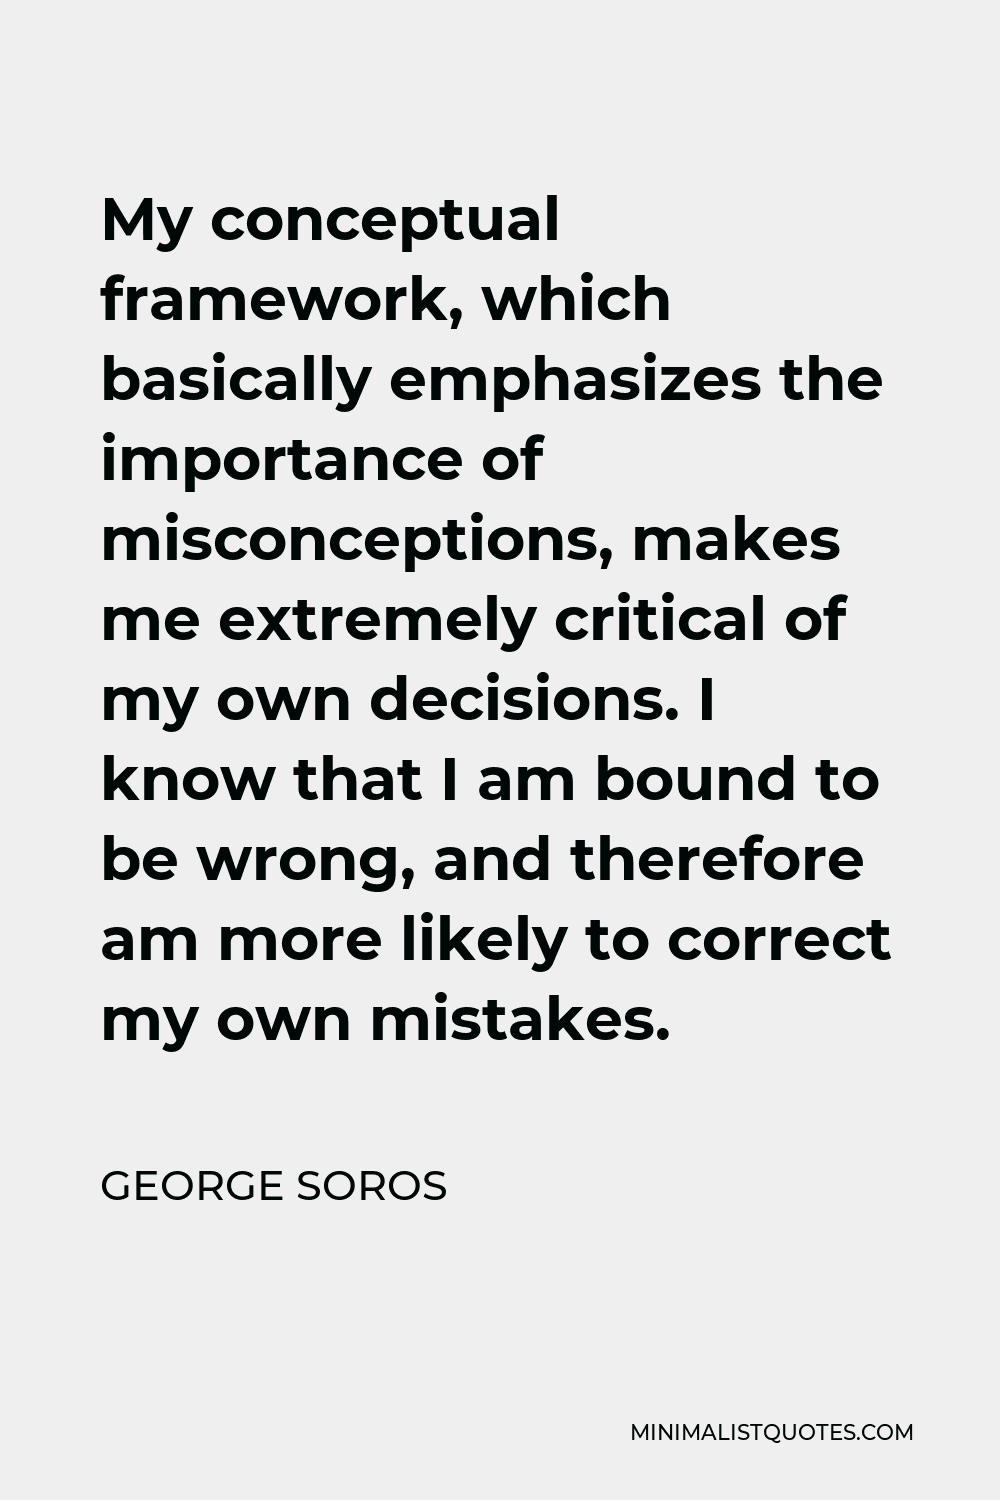 George Soros Quote - My conceptual framework, which basically emphasizes the importance of misconceptions, makes me extremely critical of my own decisions. I know that I am bound to be wrong, and therefore am more likely to correct my own mistakes.